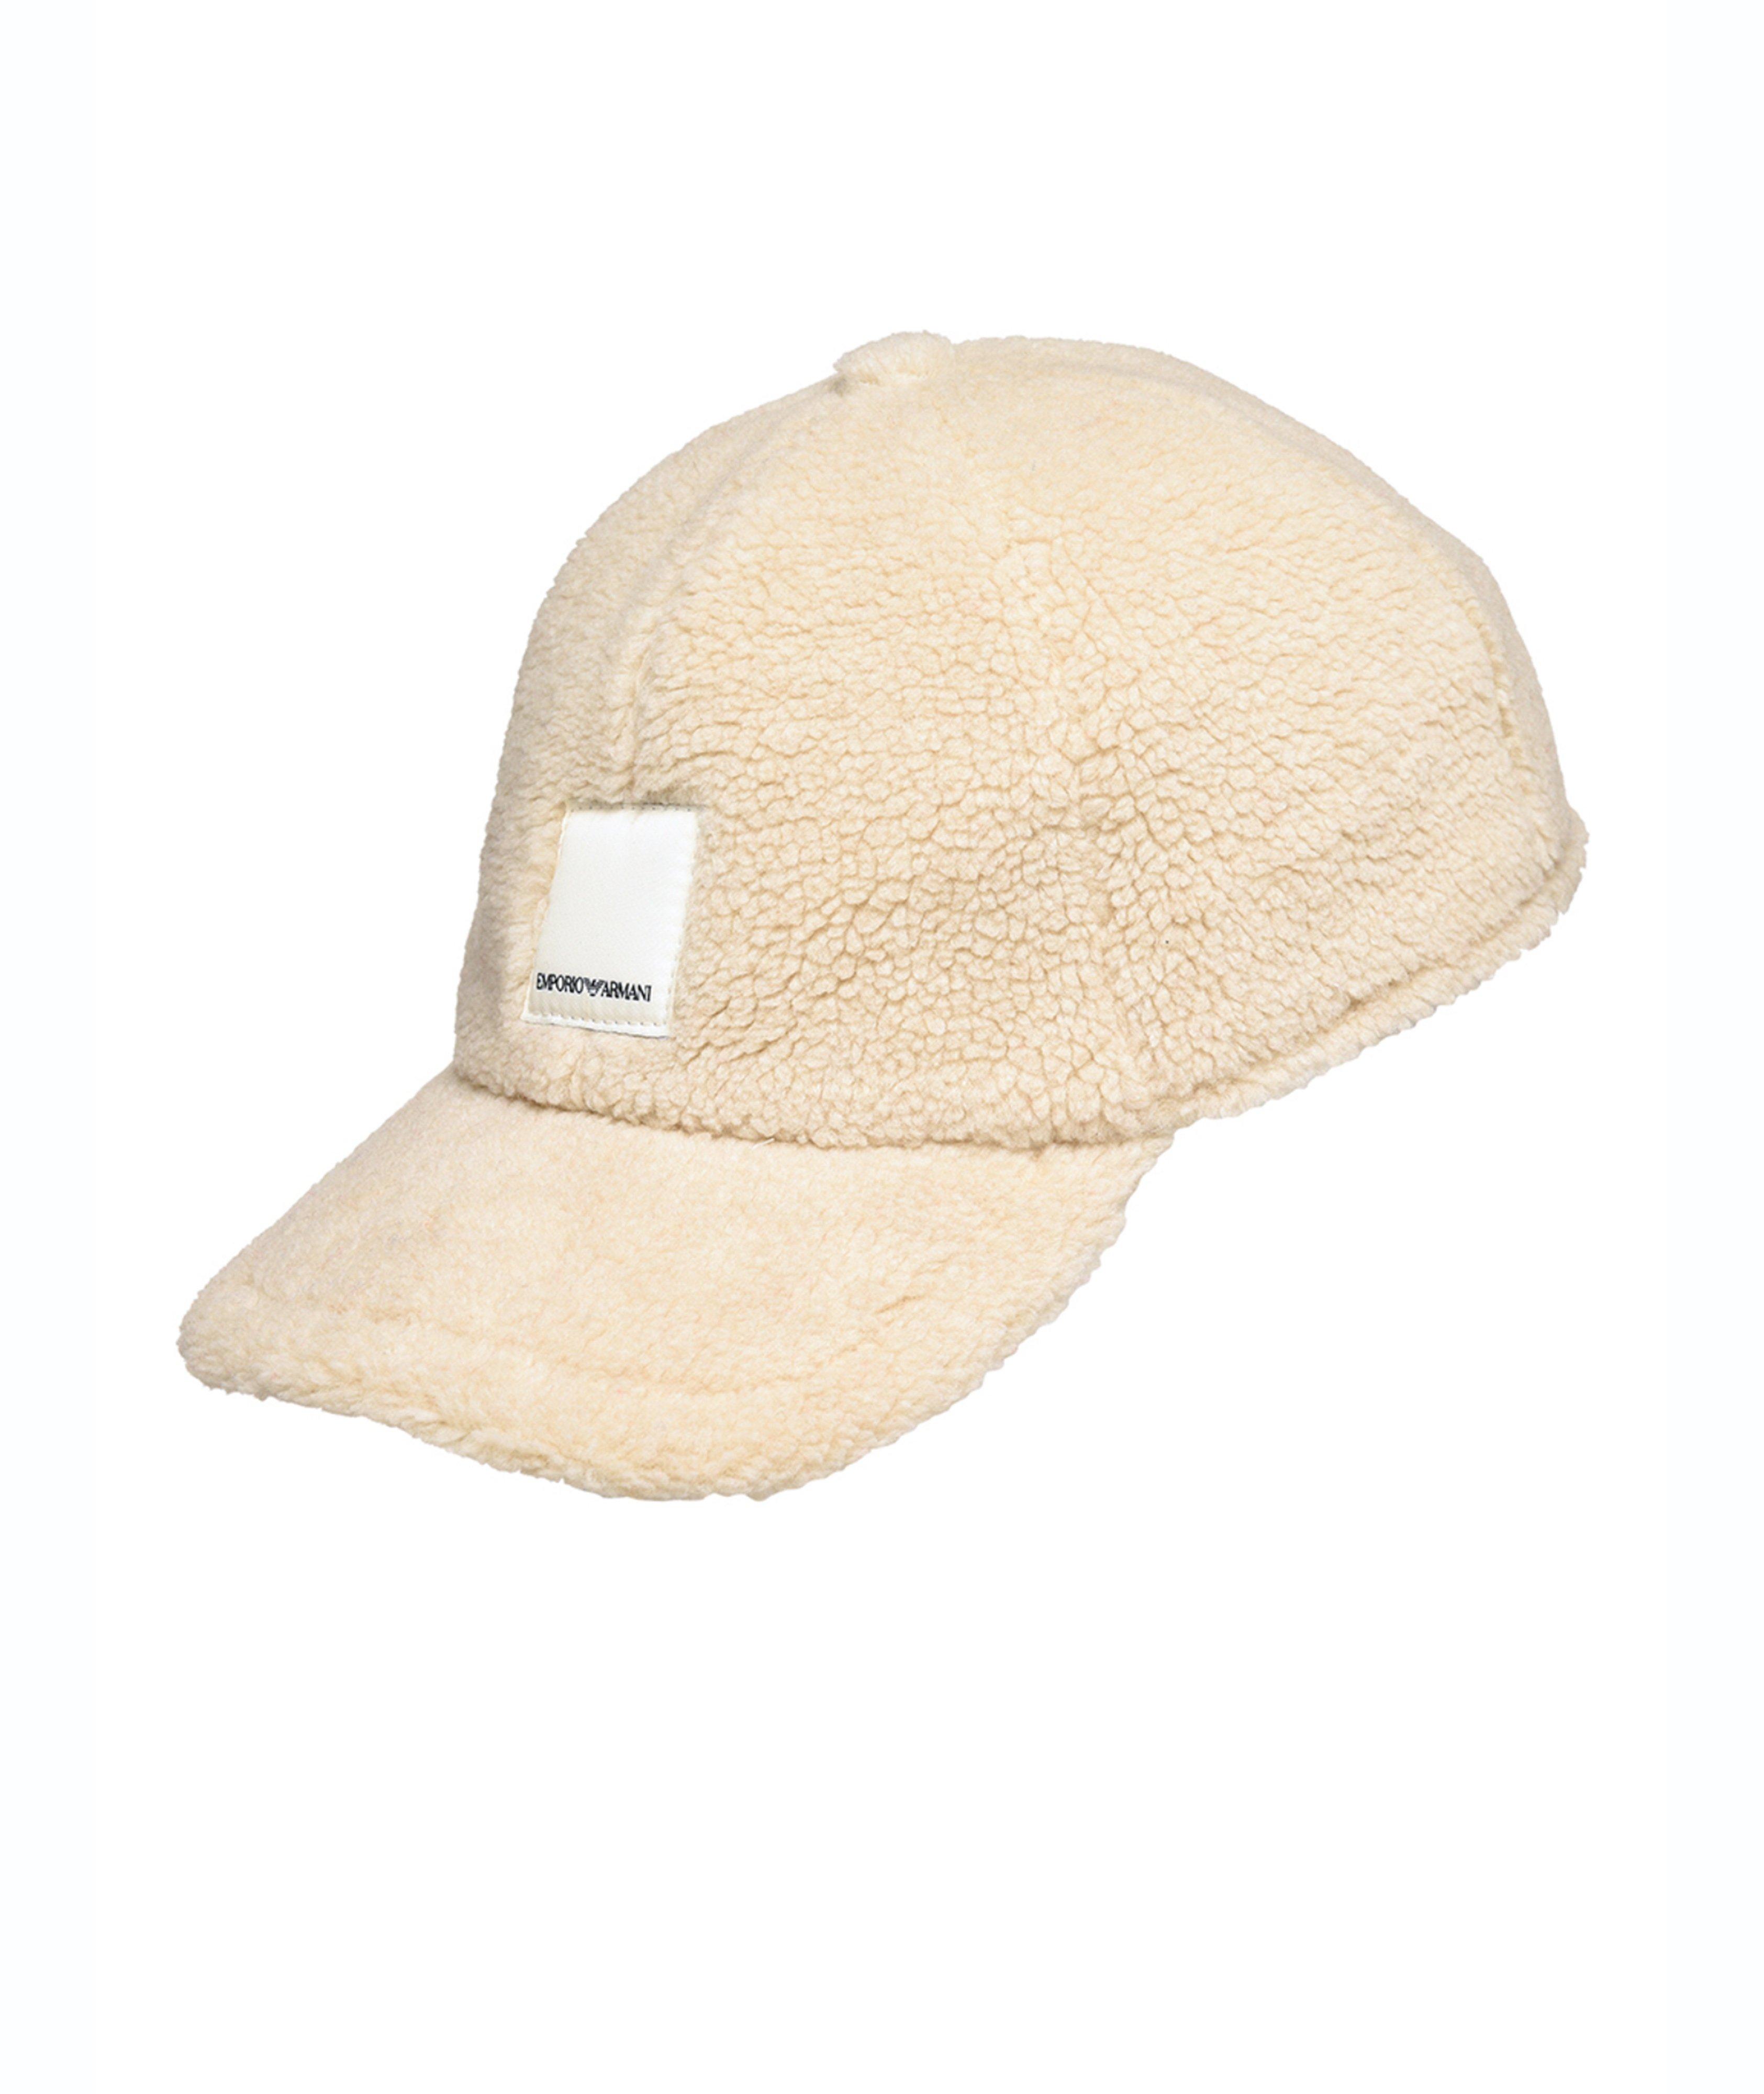 EArctic Sustainable Collection Logo Sherpa Baseball Cap image 0